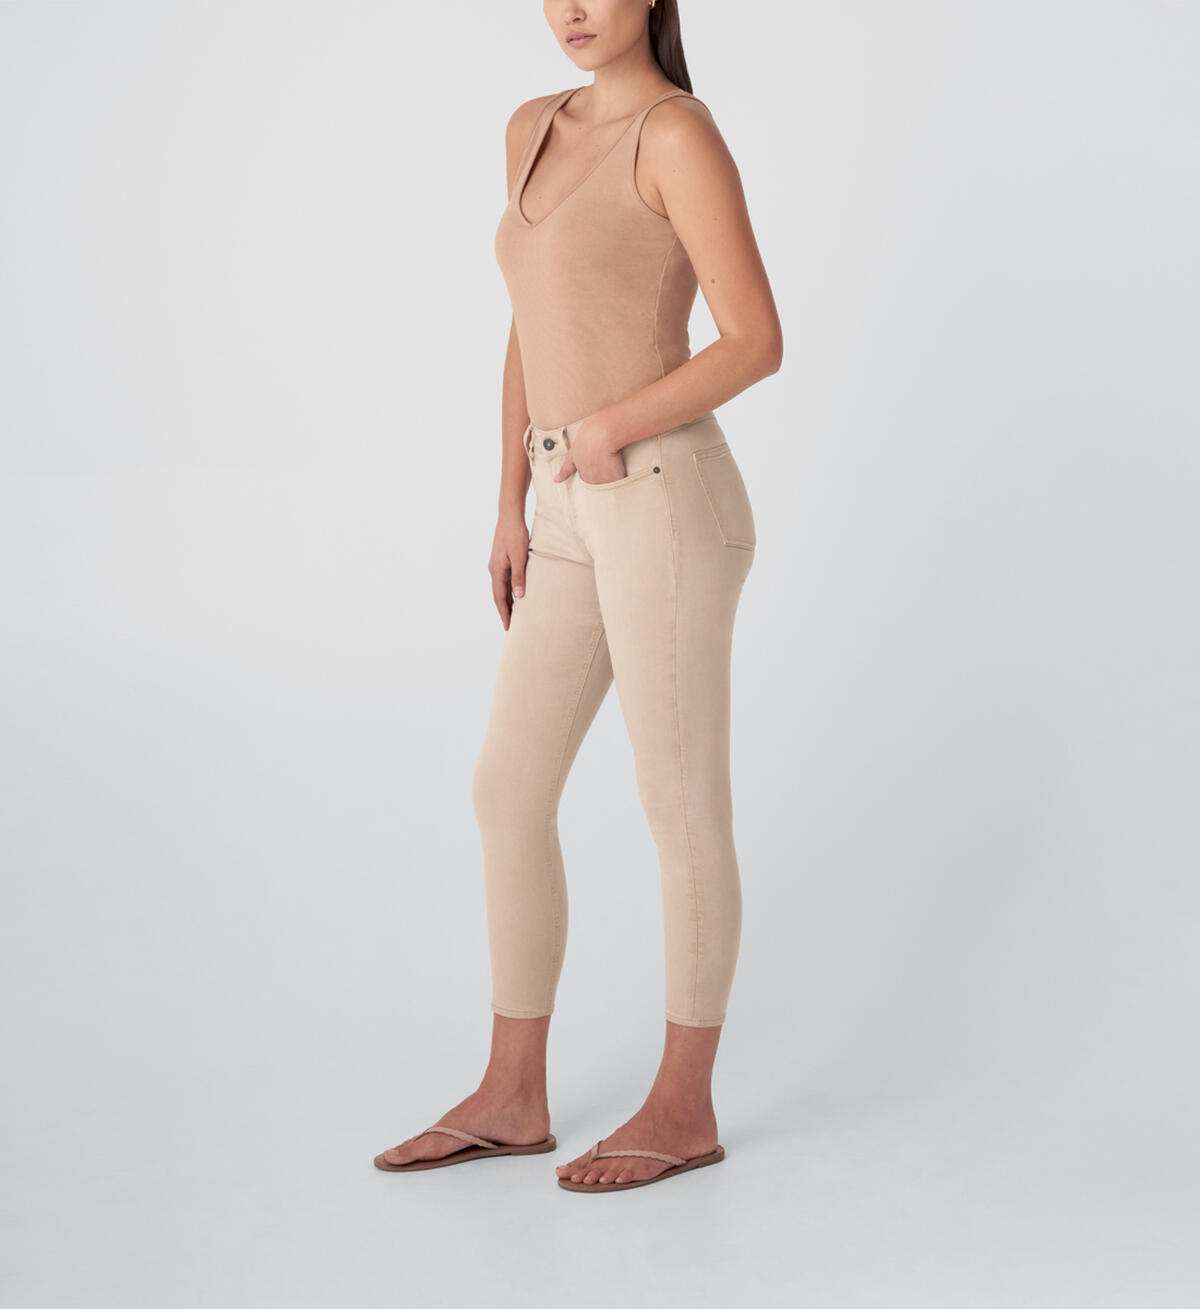 Most Wanted Mid Rise Skinny Jeans, Tan, hi-res image number 2